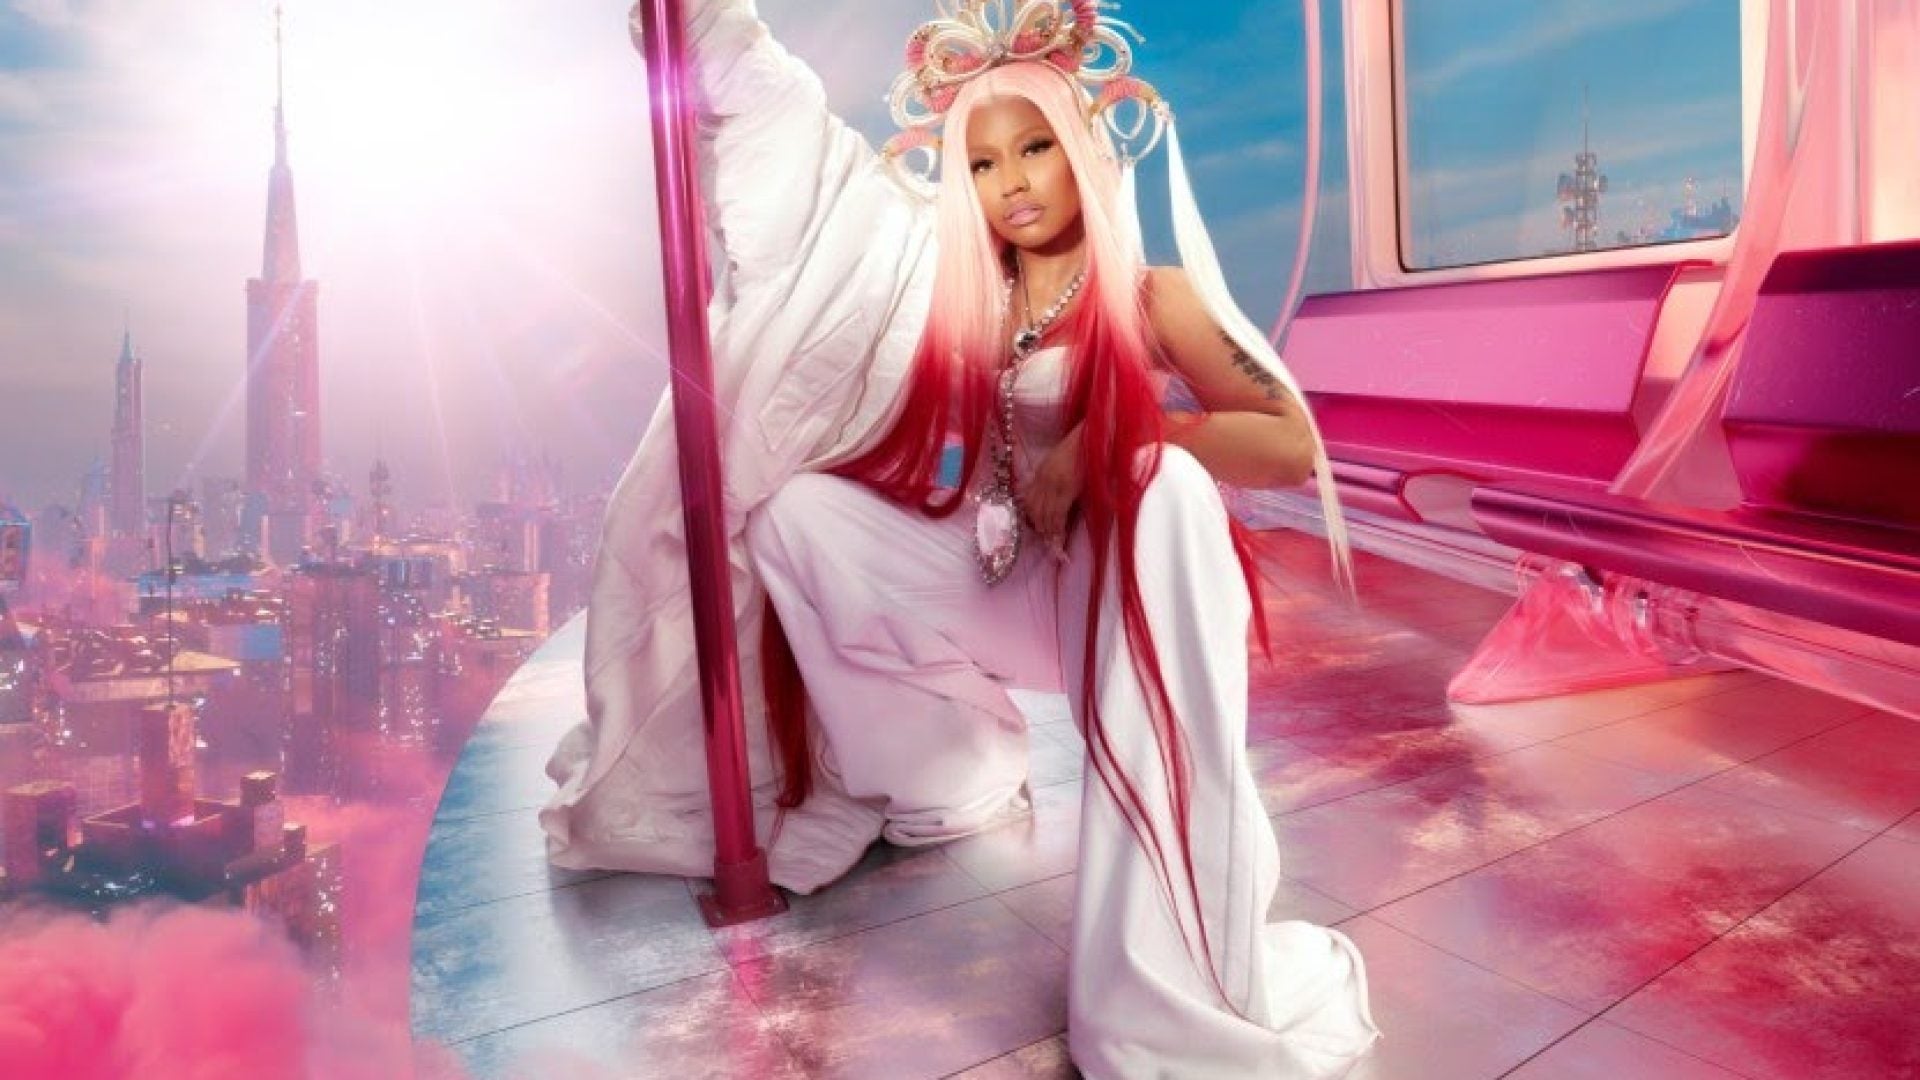 Nicki Minaj To Host The MTV VMAs For Second Year In A Row